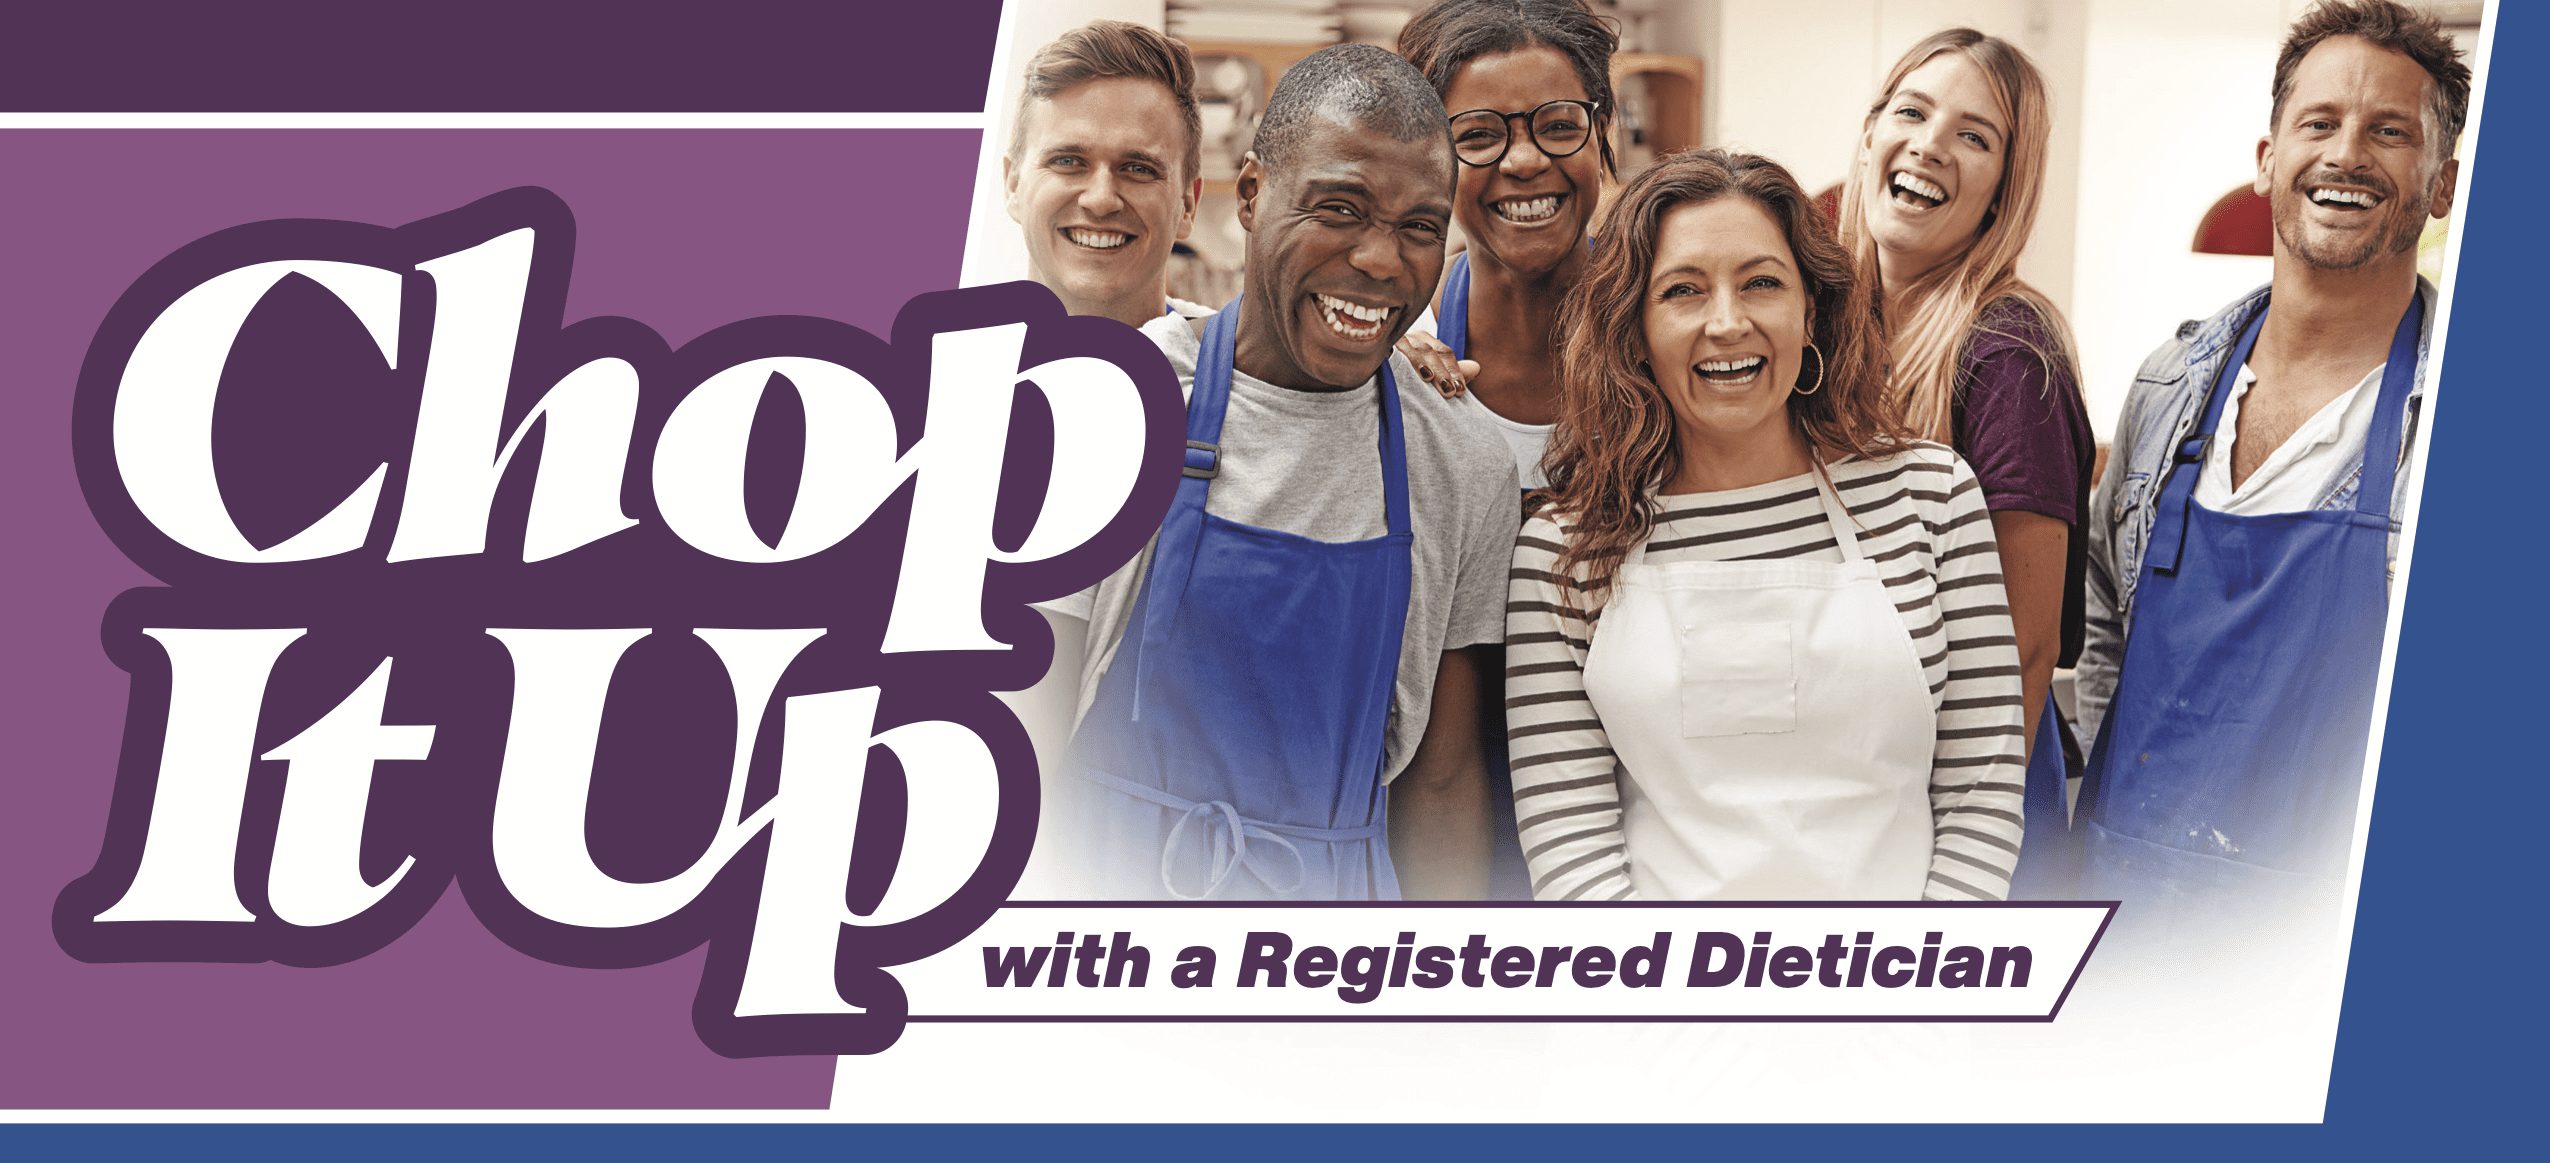 Six friendly adults in cooking aprons smiling and laughing. Chop it up Chop it up with a Registered Dietician.